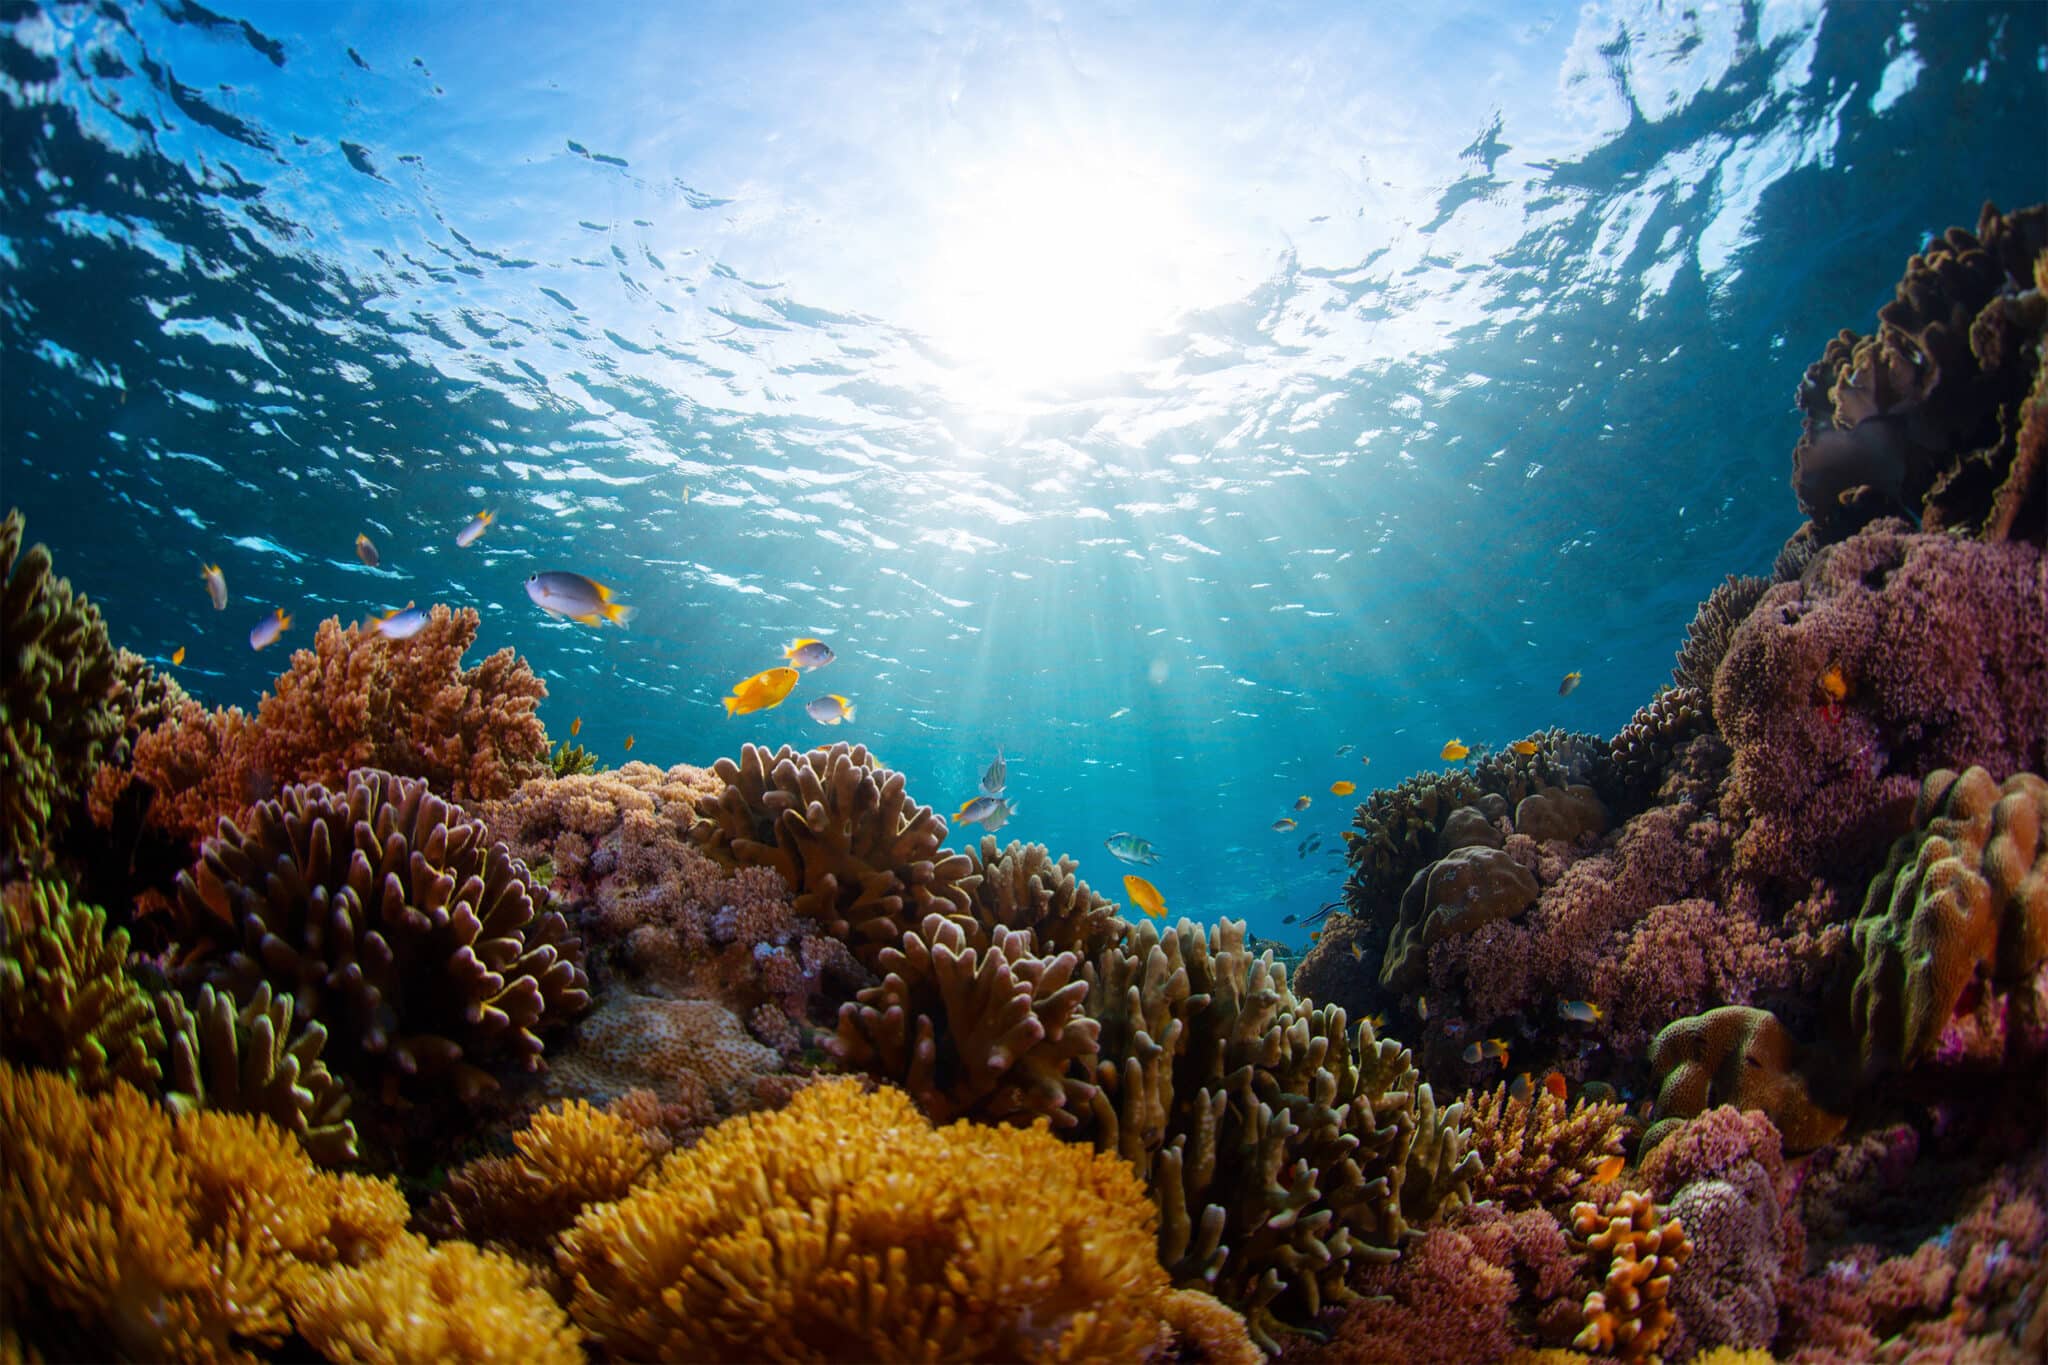 What Is A Biotic Factor In A Coral Reef Ecosystem